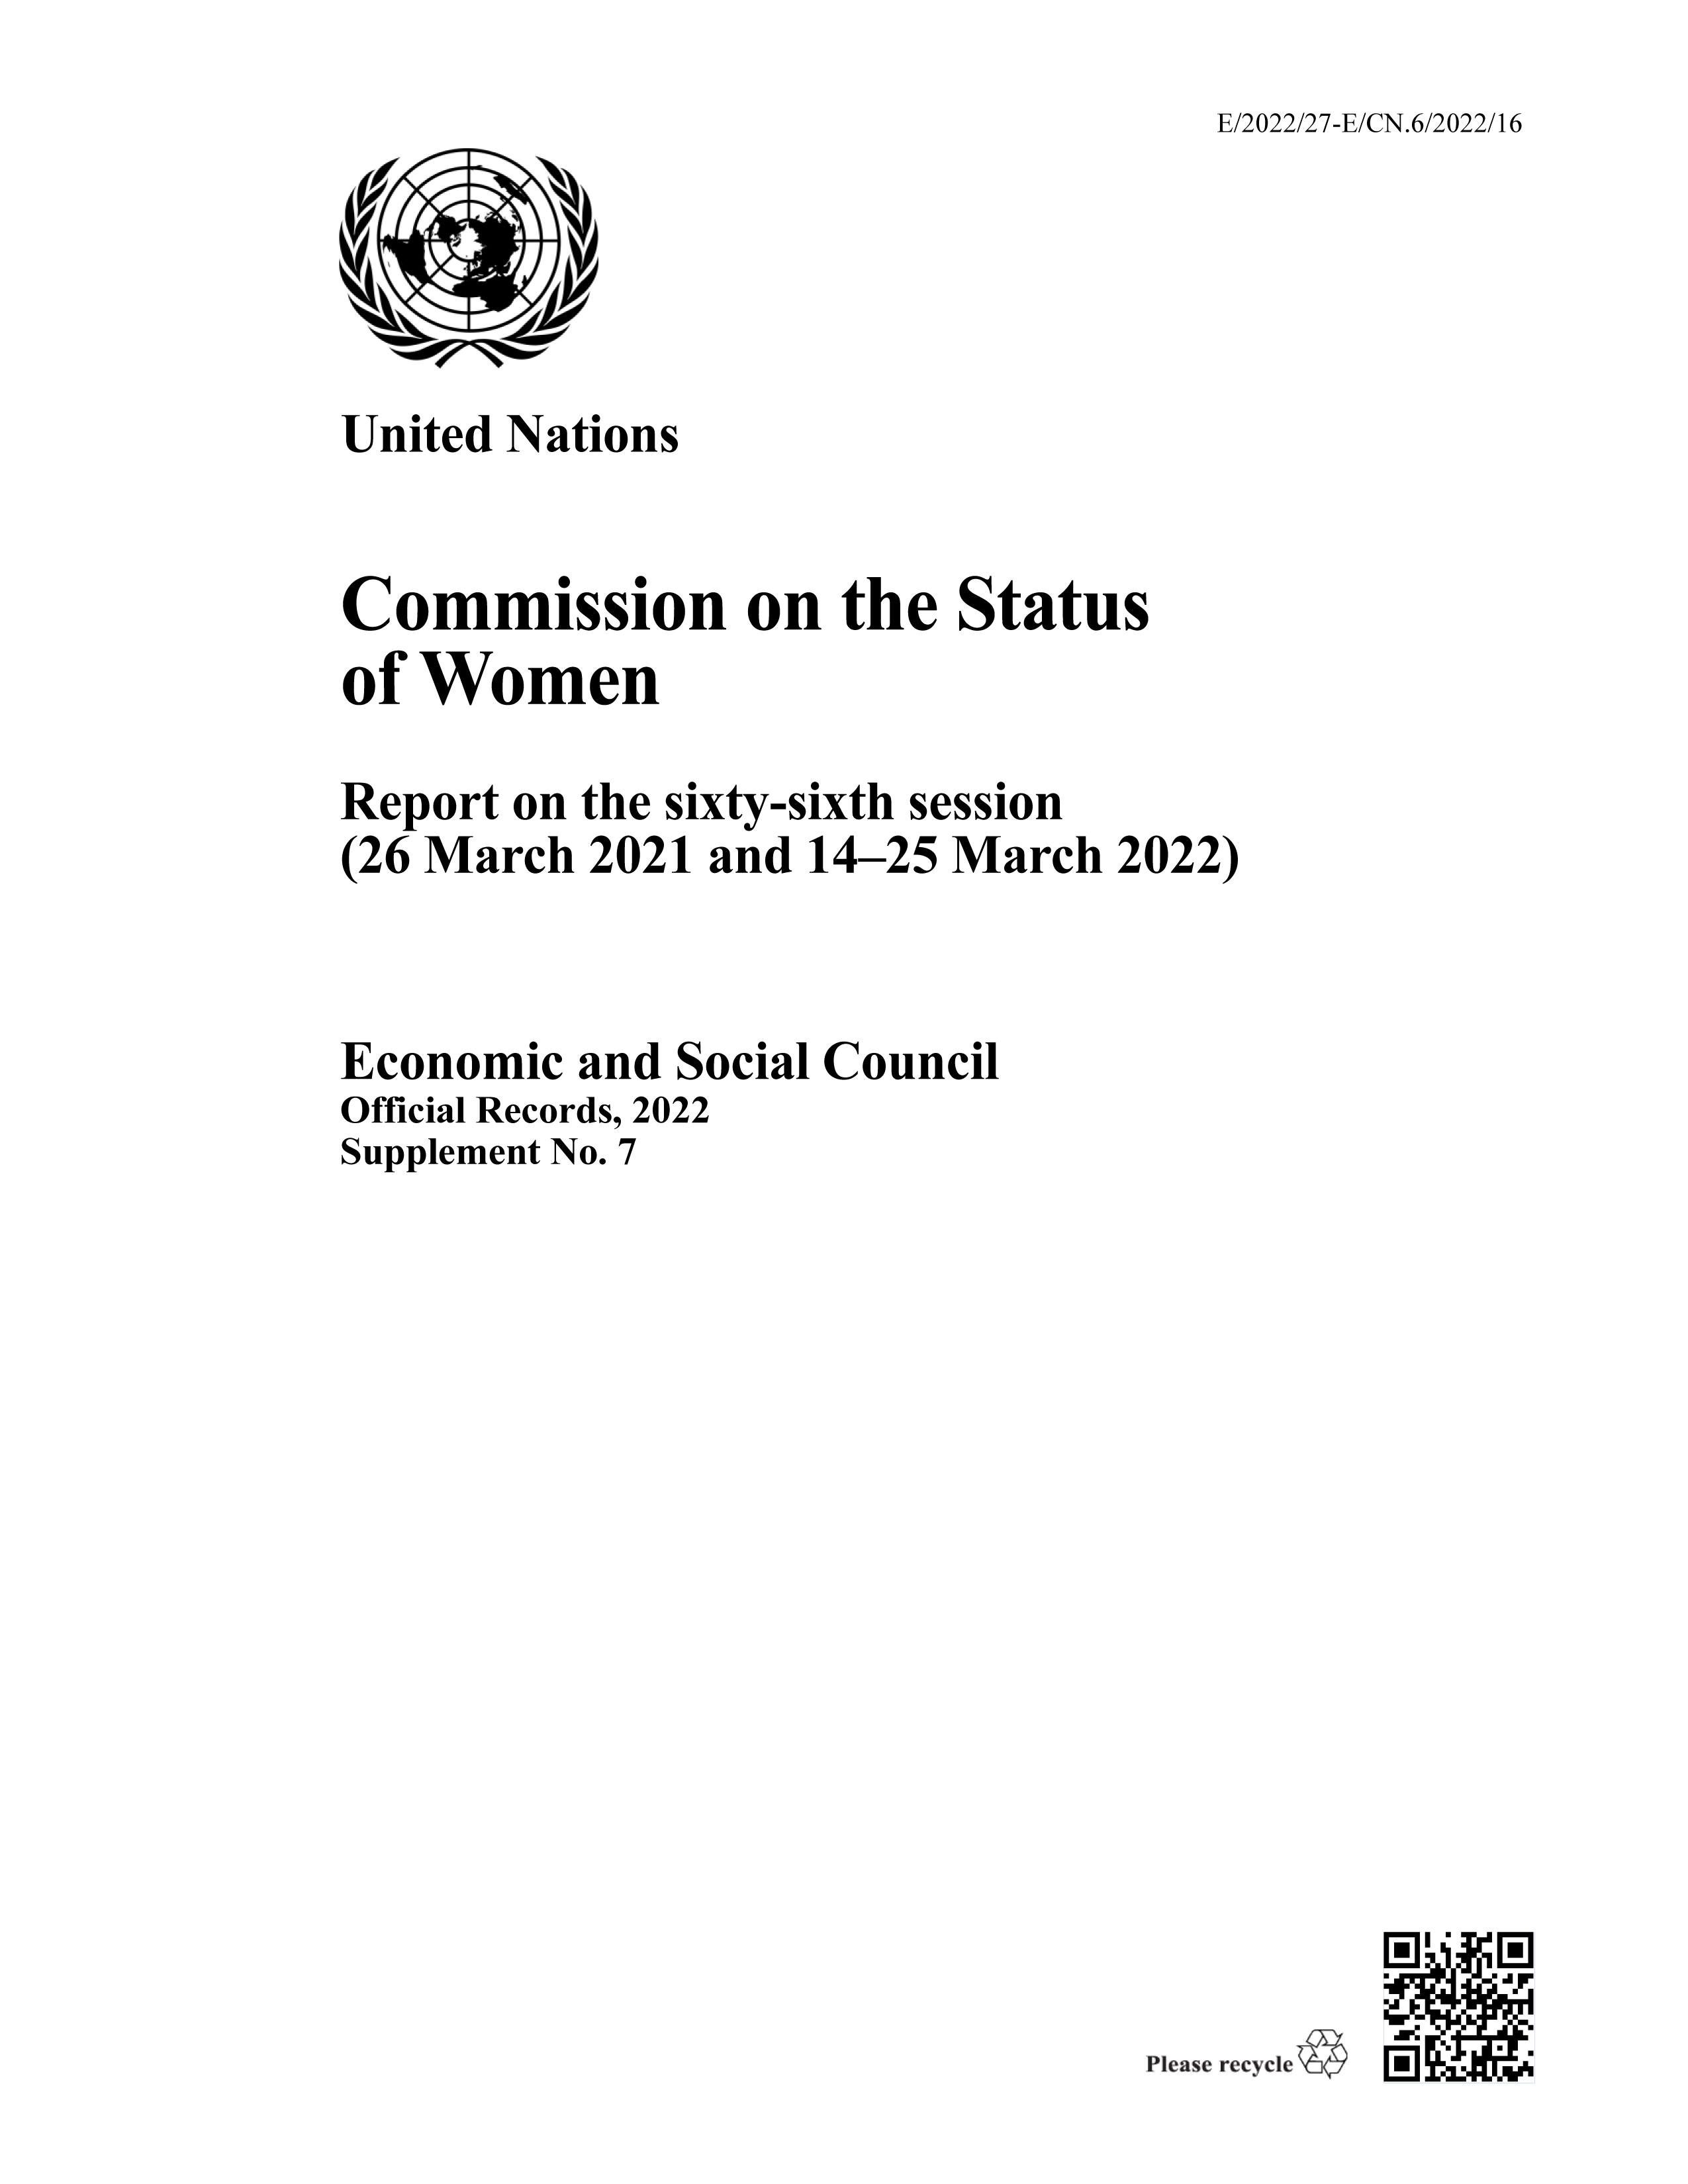 image of Report of the Commission on the Status of Women 2022